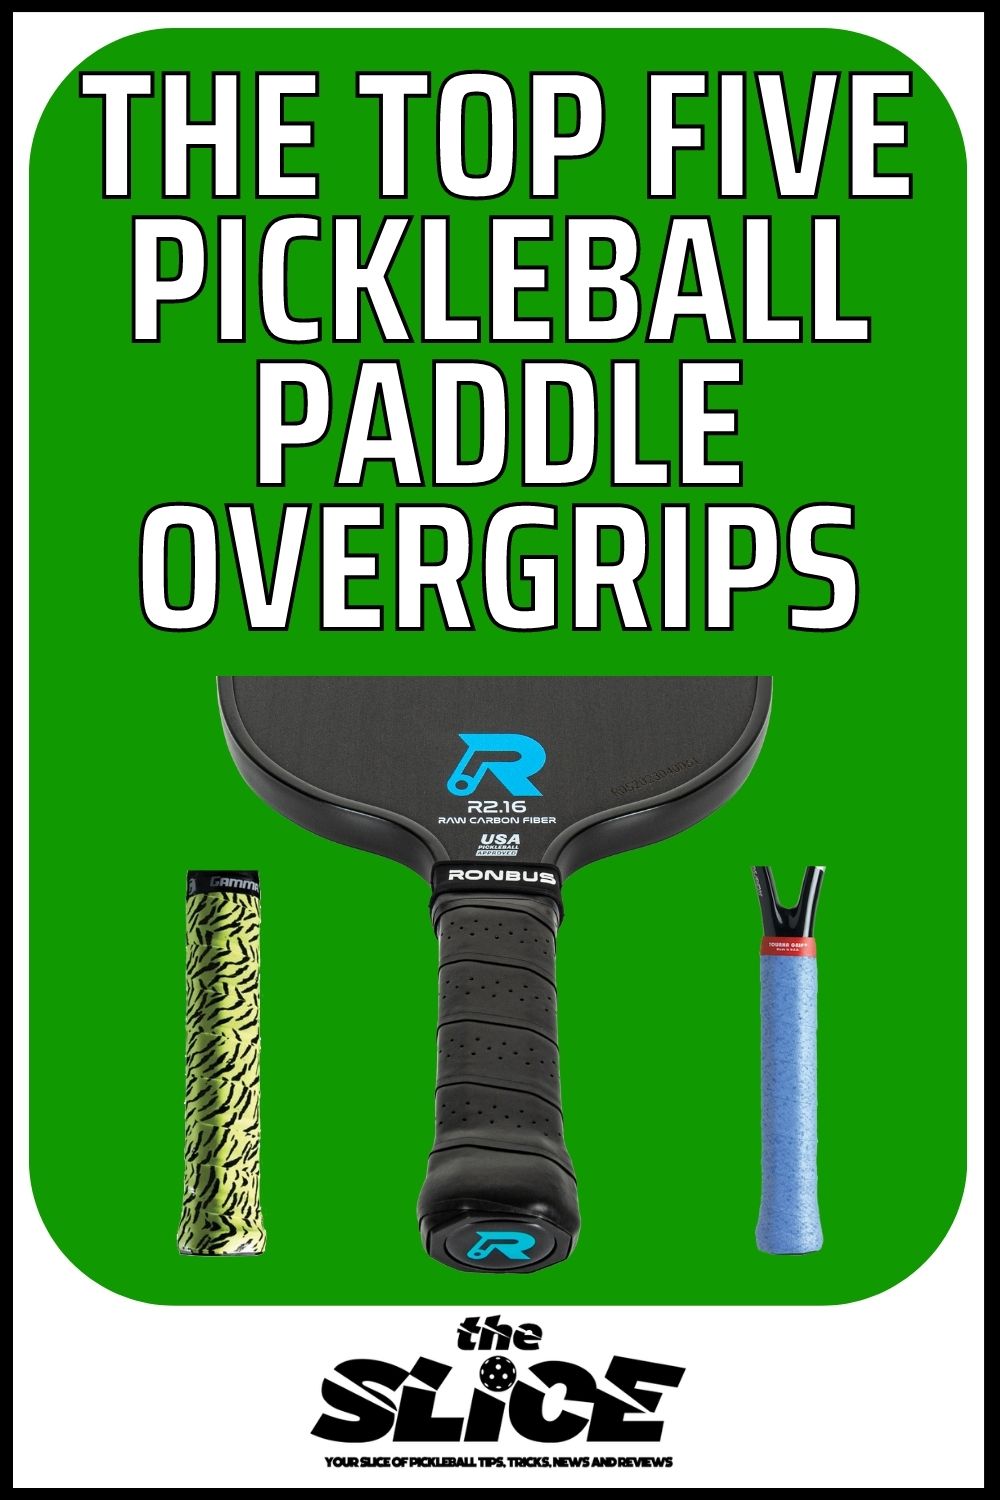 The Top Five Pickleball Paddle Overgrips